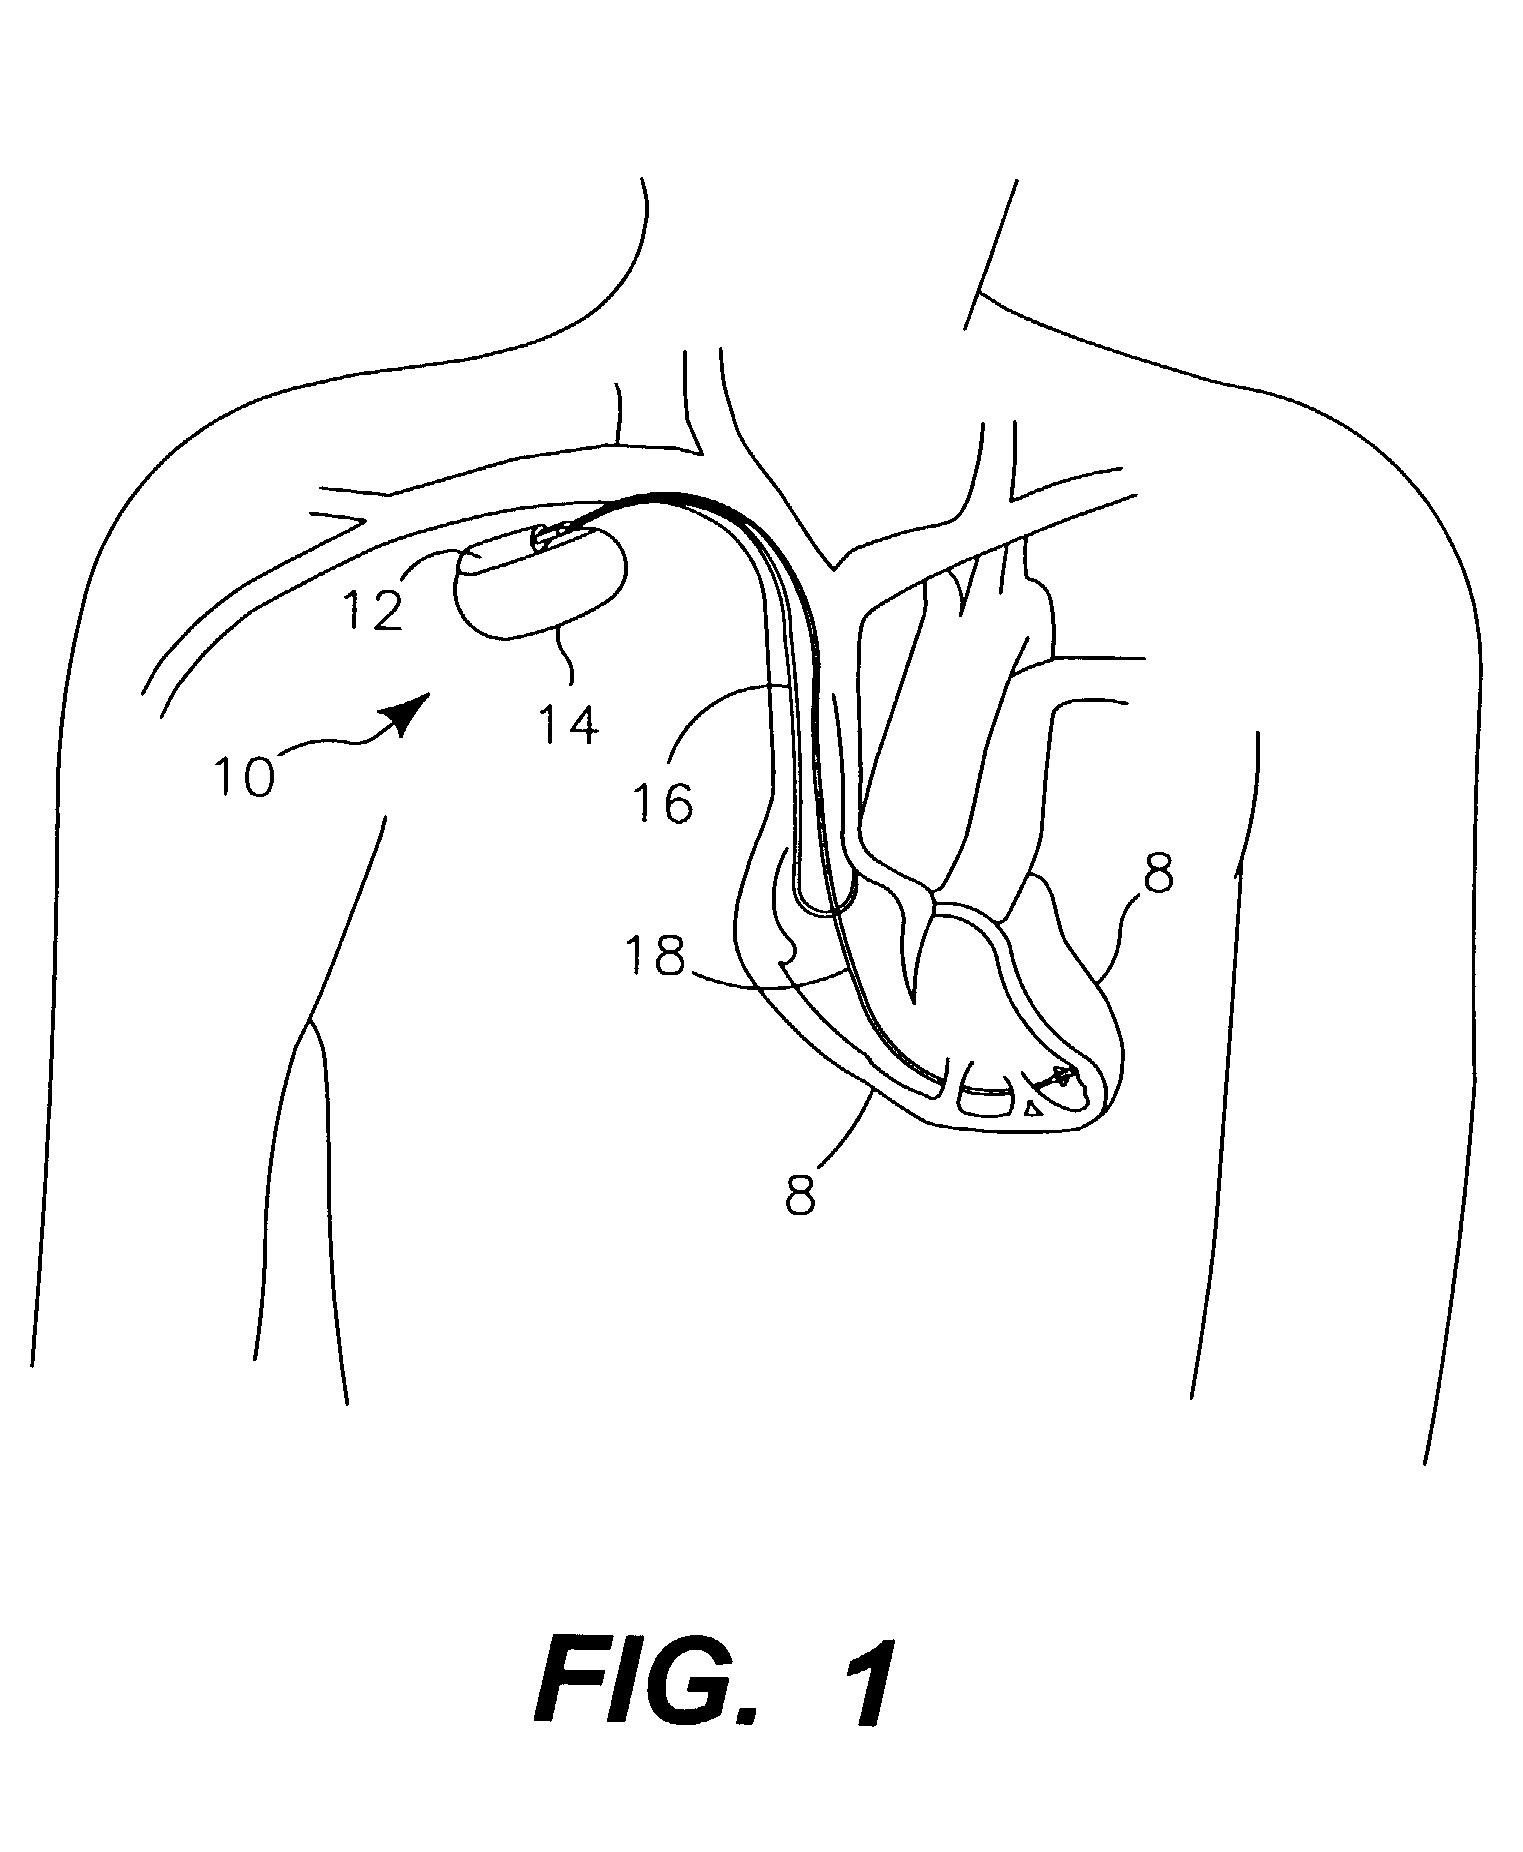 System and method for transmission of medical and like data from a patient to a dedicated internet website